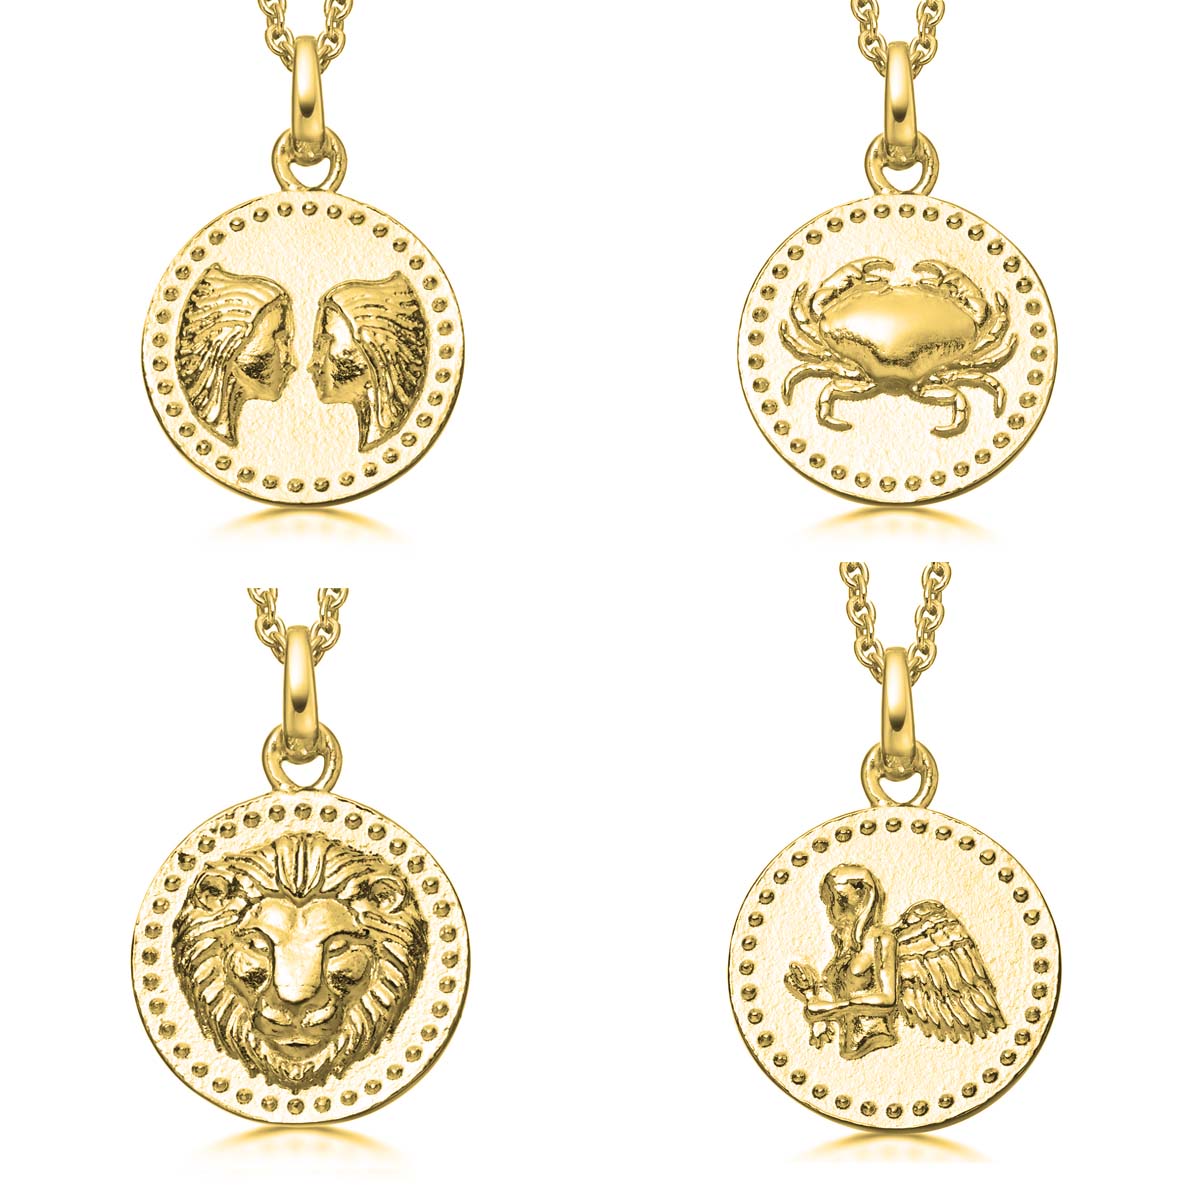 Silver and gold plated zodiac pendants 